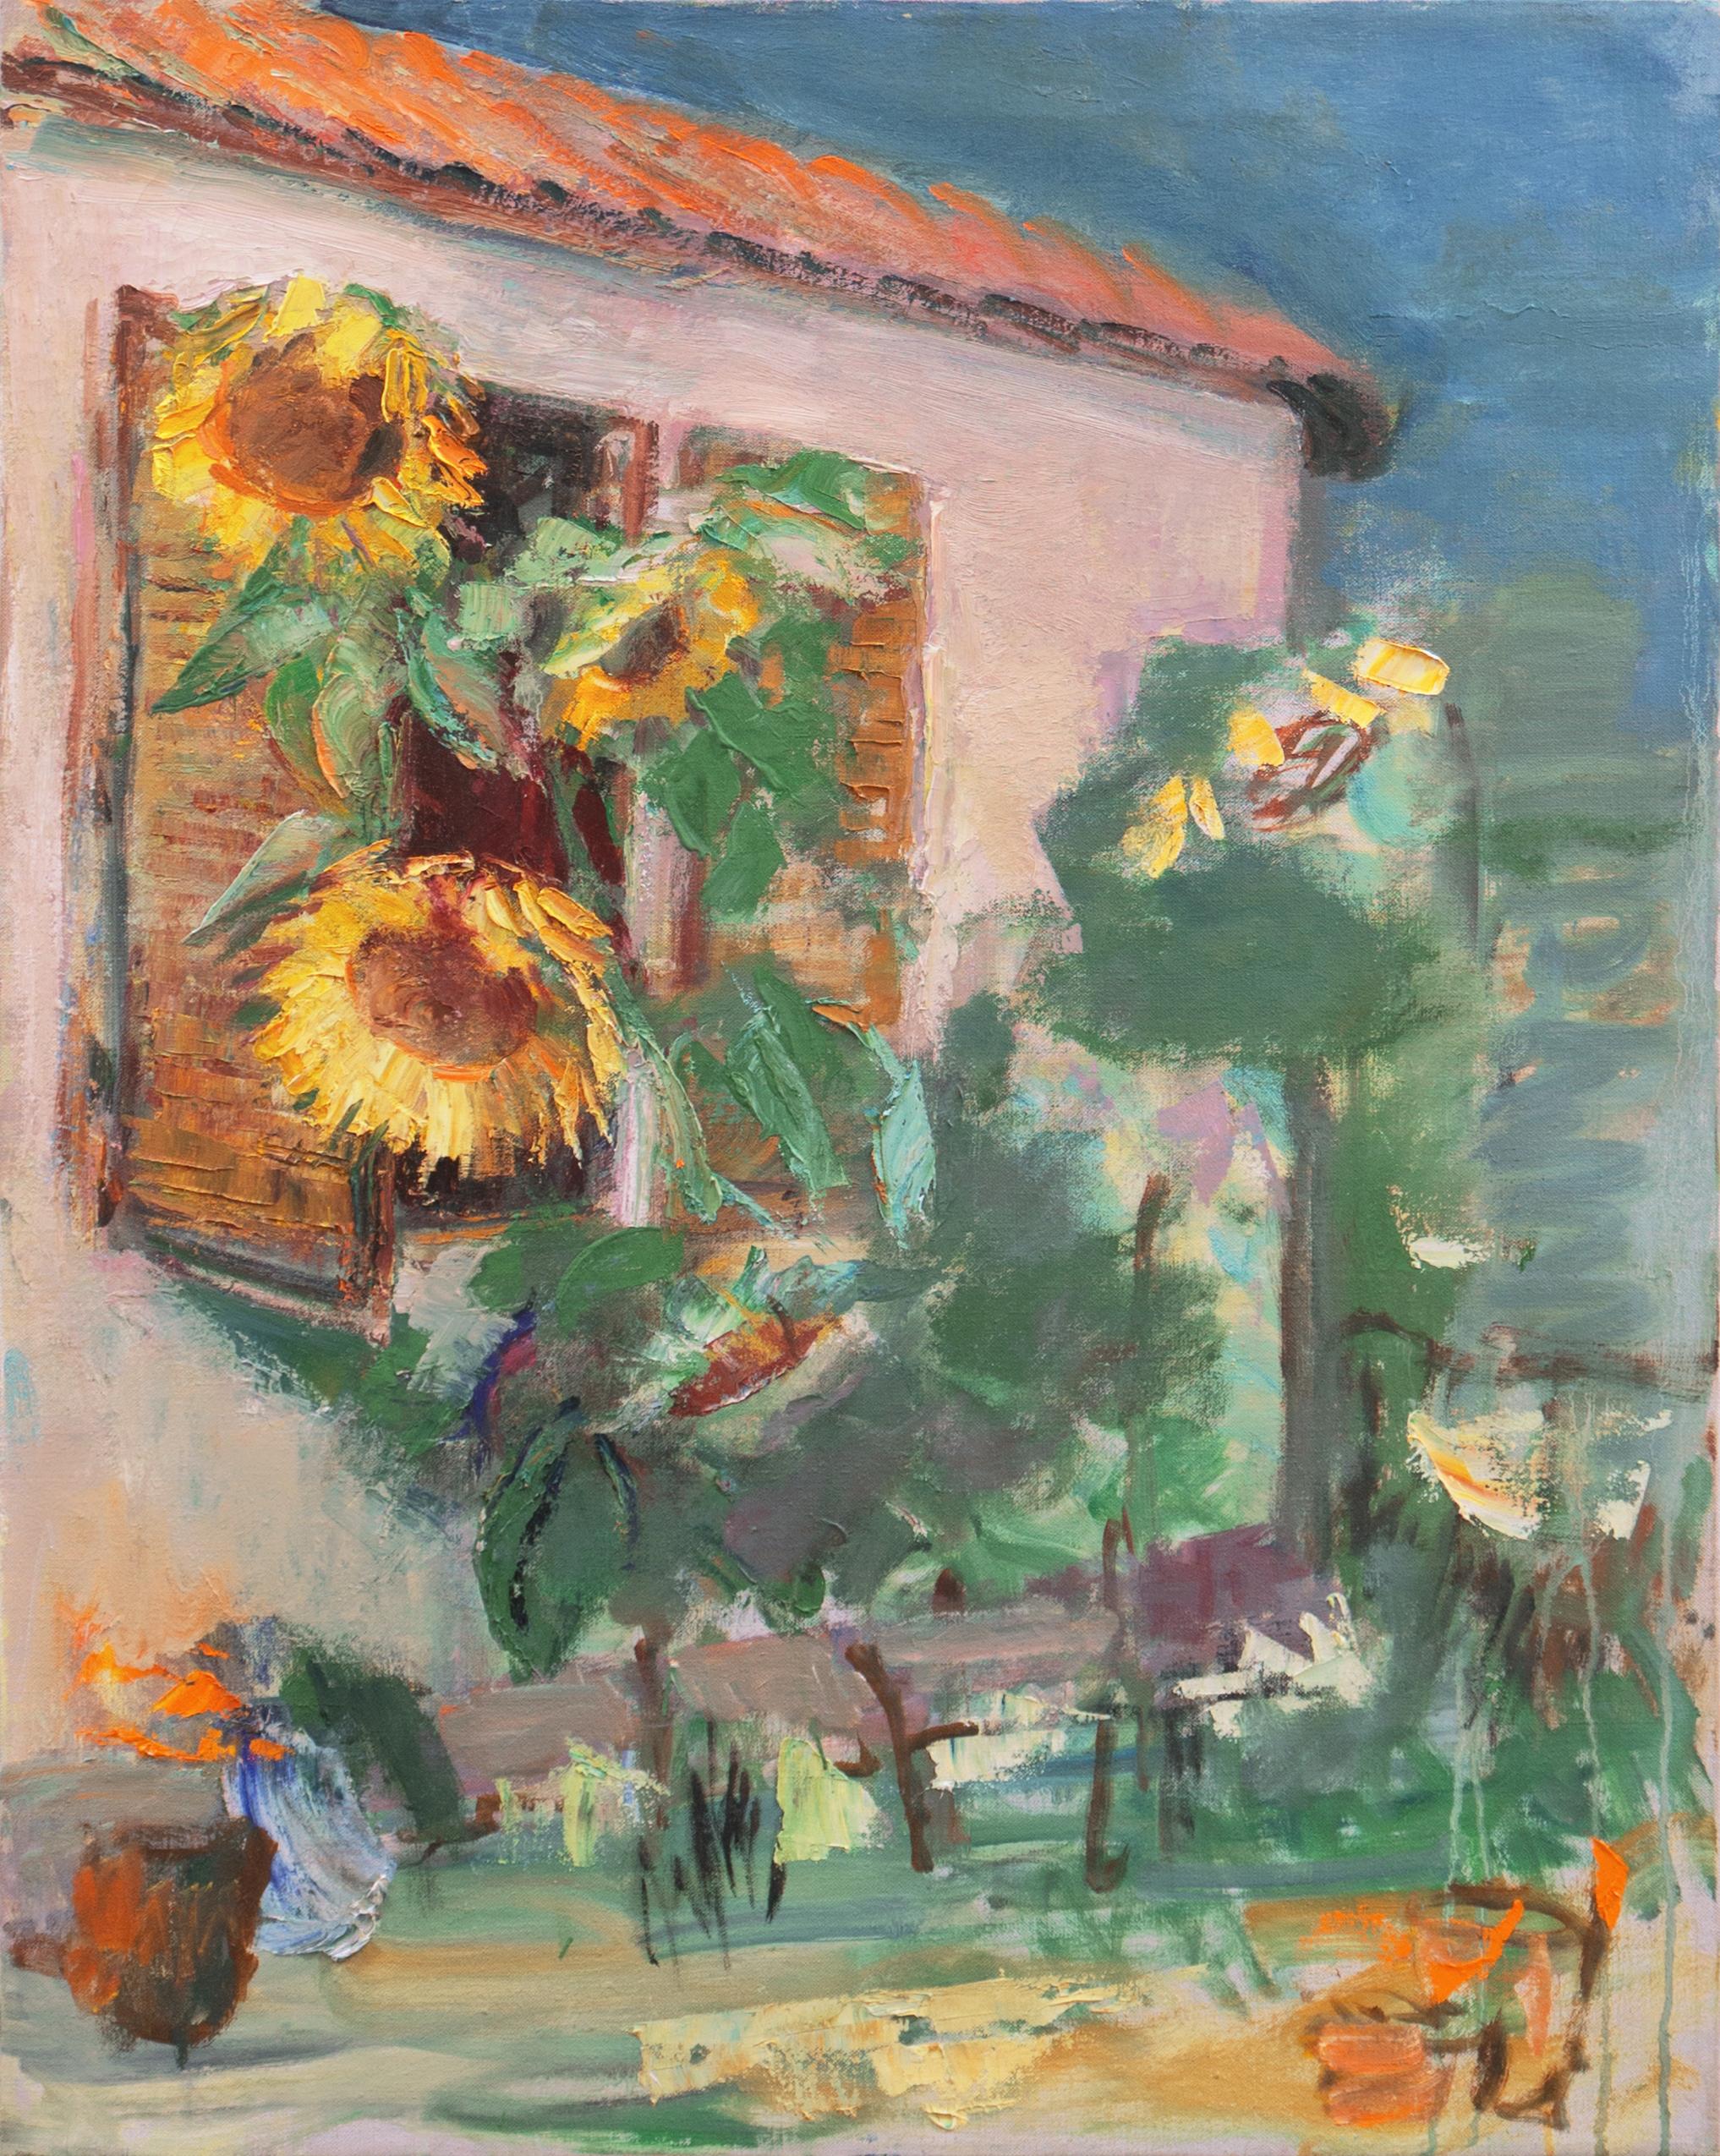 M. v R. Landscape Painting - 'Sunflowers in the Garden', Tuscan Villa, Tuscany